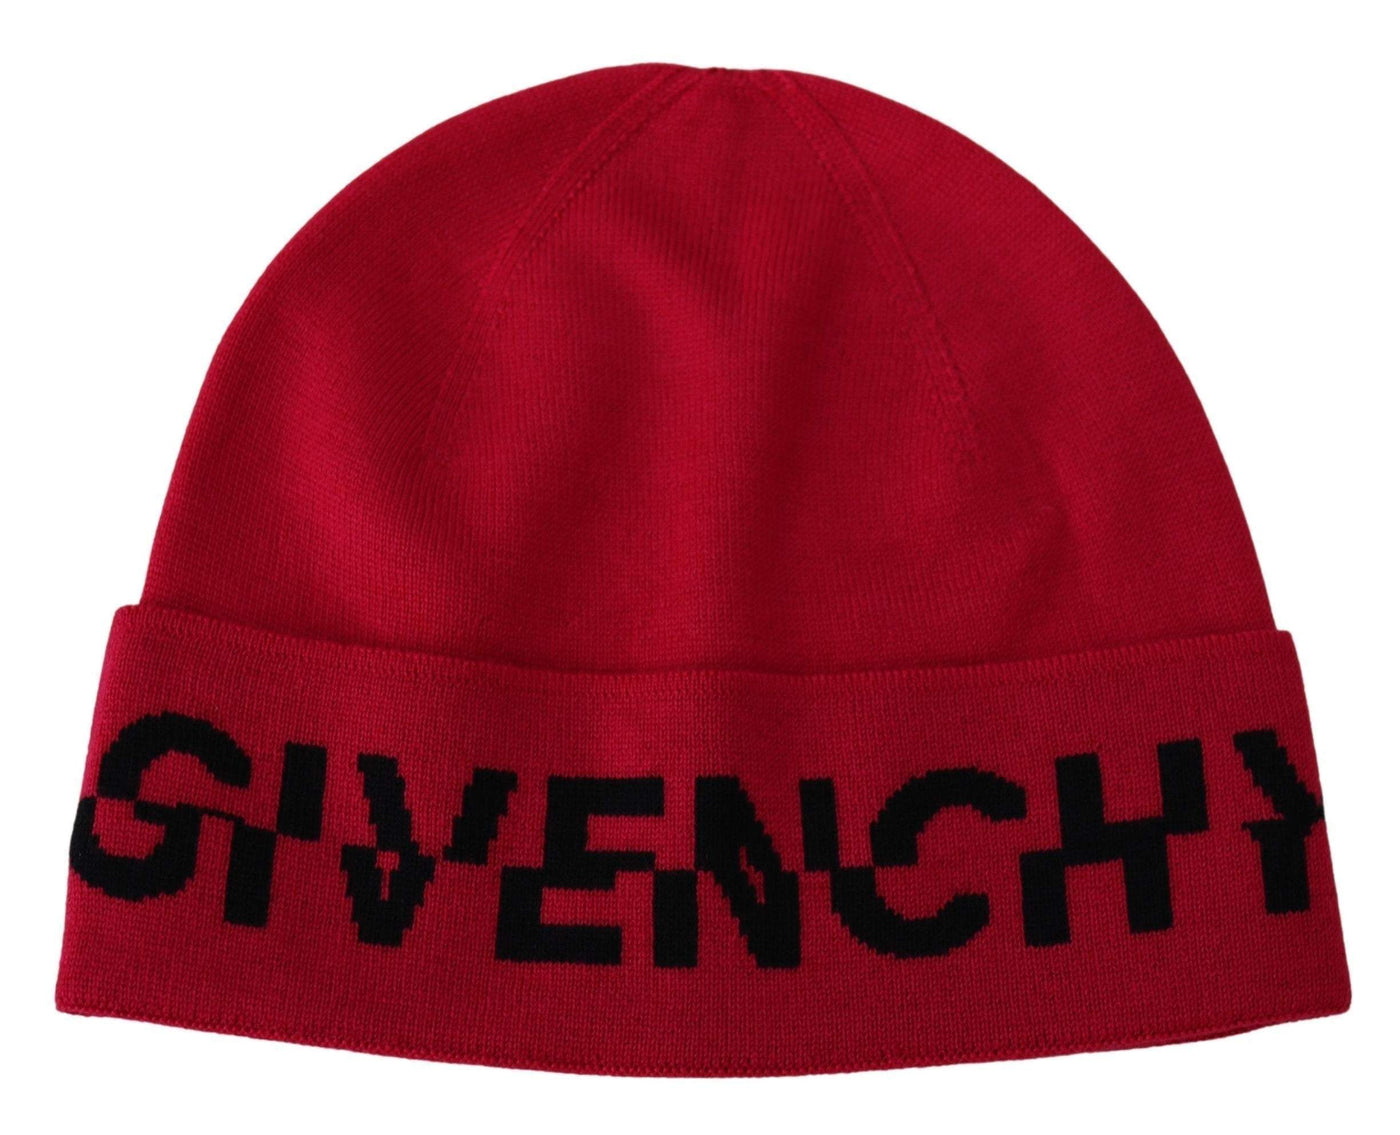 GIVENCHY Red Wool Beanie Unisex Men Women Beanie Hat #women, Accessories - New Arrivals, feed-agegroup-adult, feed-color-red, feed-gender-female, feed-size-58 cm|M, feed-size-OS, Gender_Women, GIVENCHY, Hats & Caps - Men - Accessories, Hats - Women - Accessories, Red at SEYMAYKA